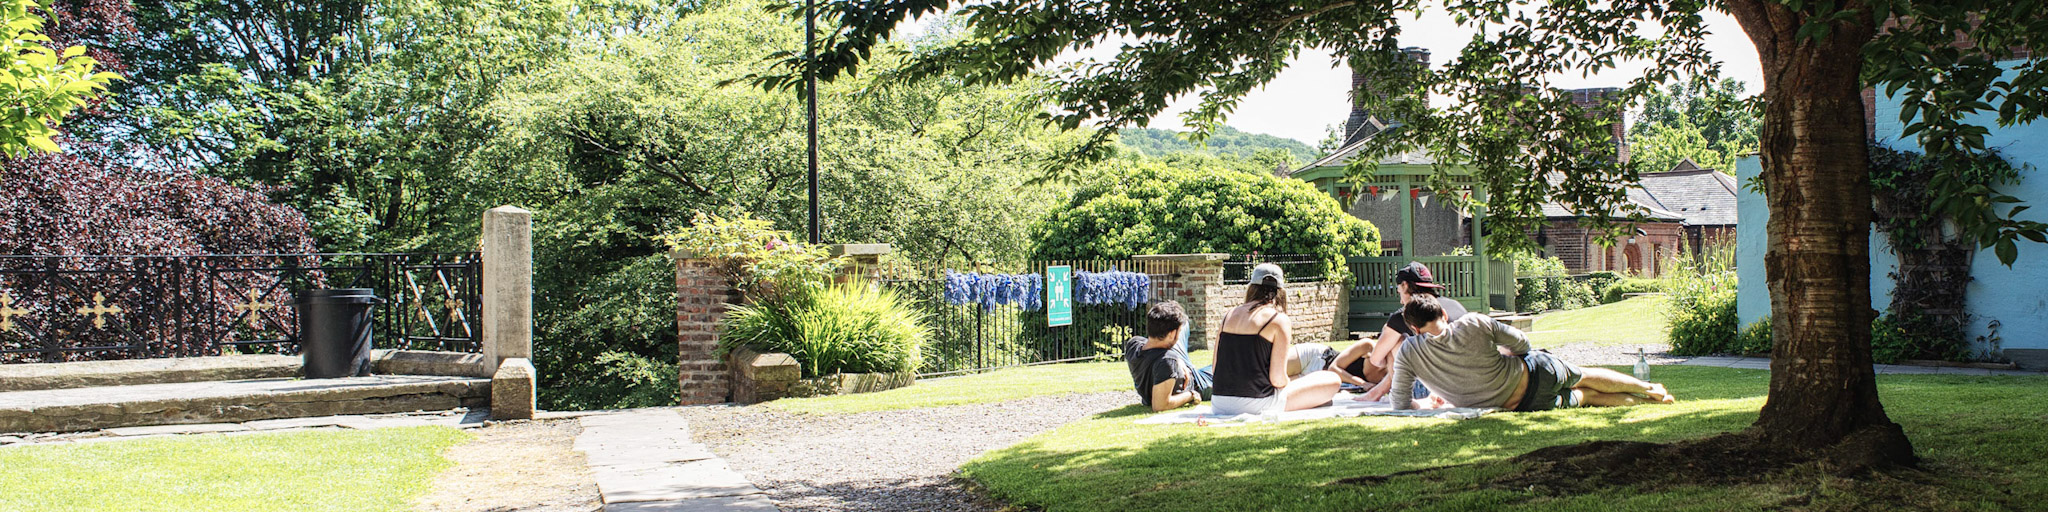 Students having a picnic in the St John's College gardens